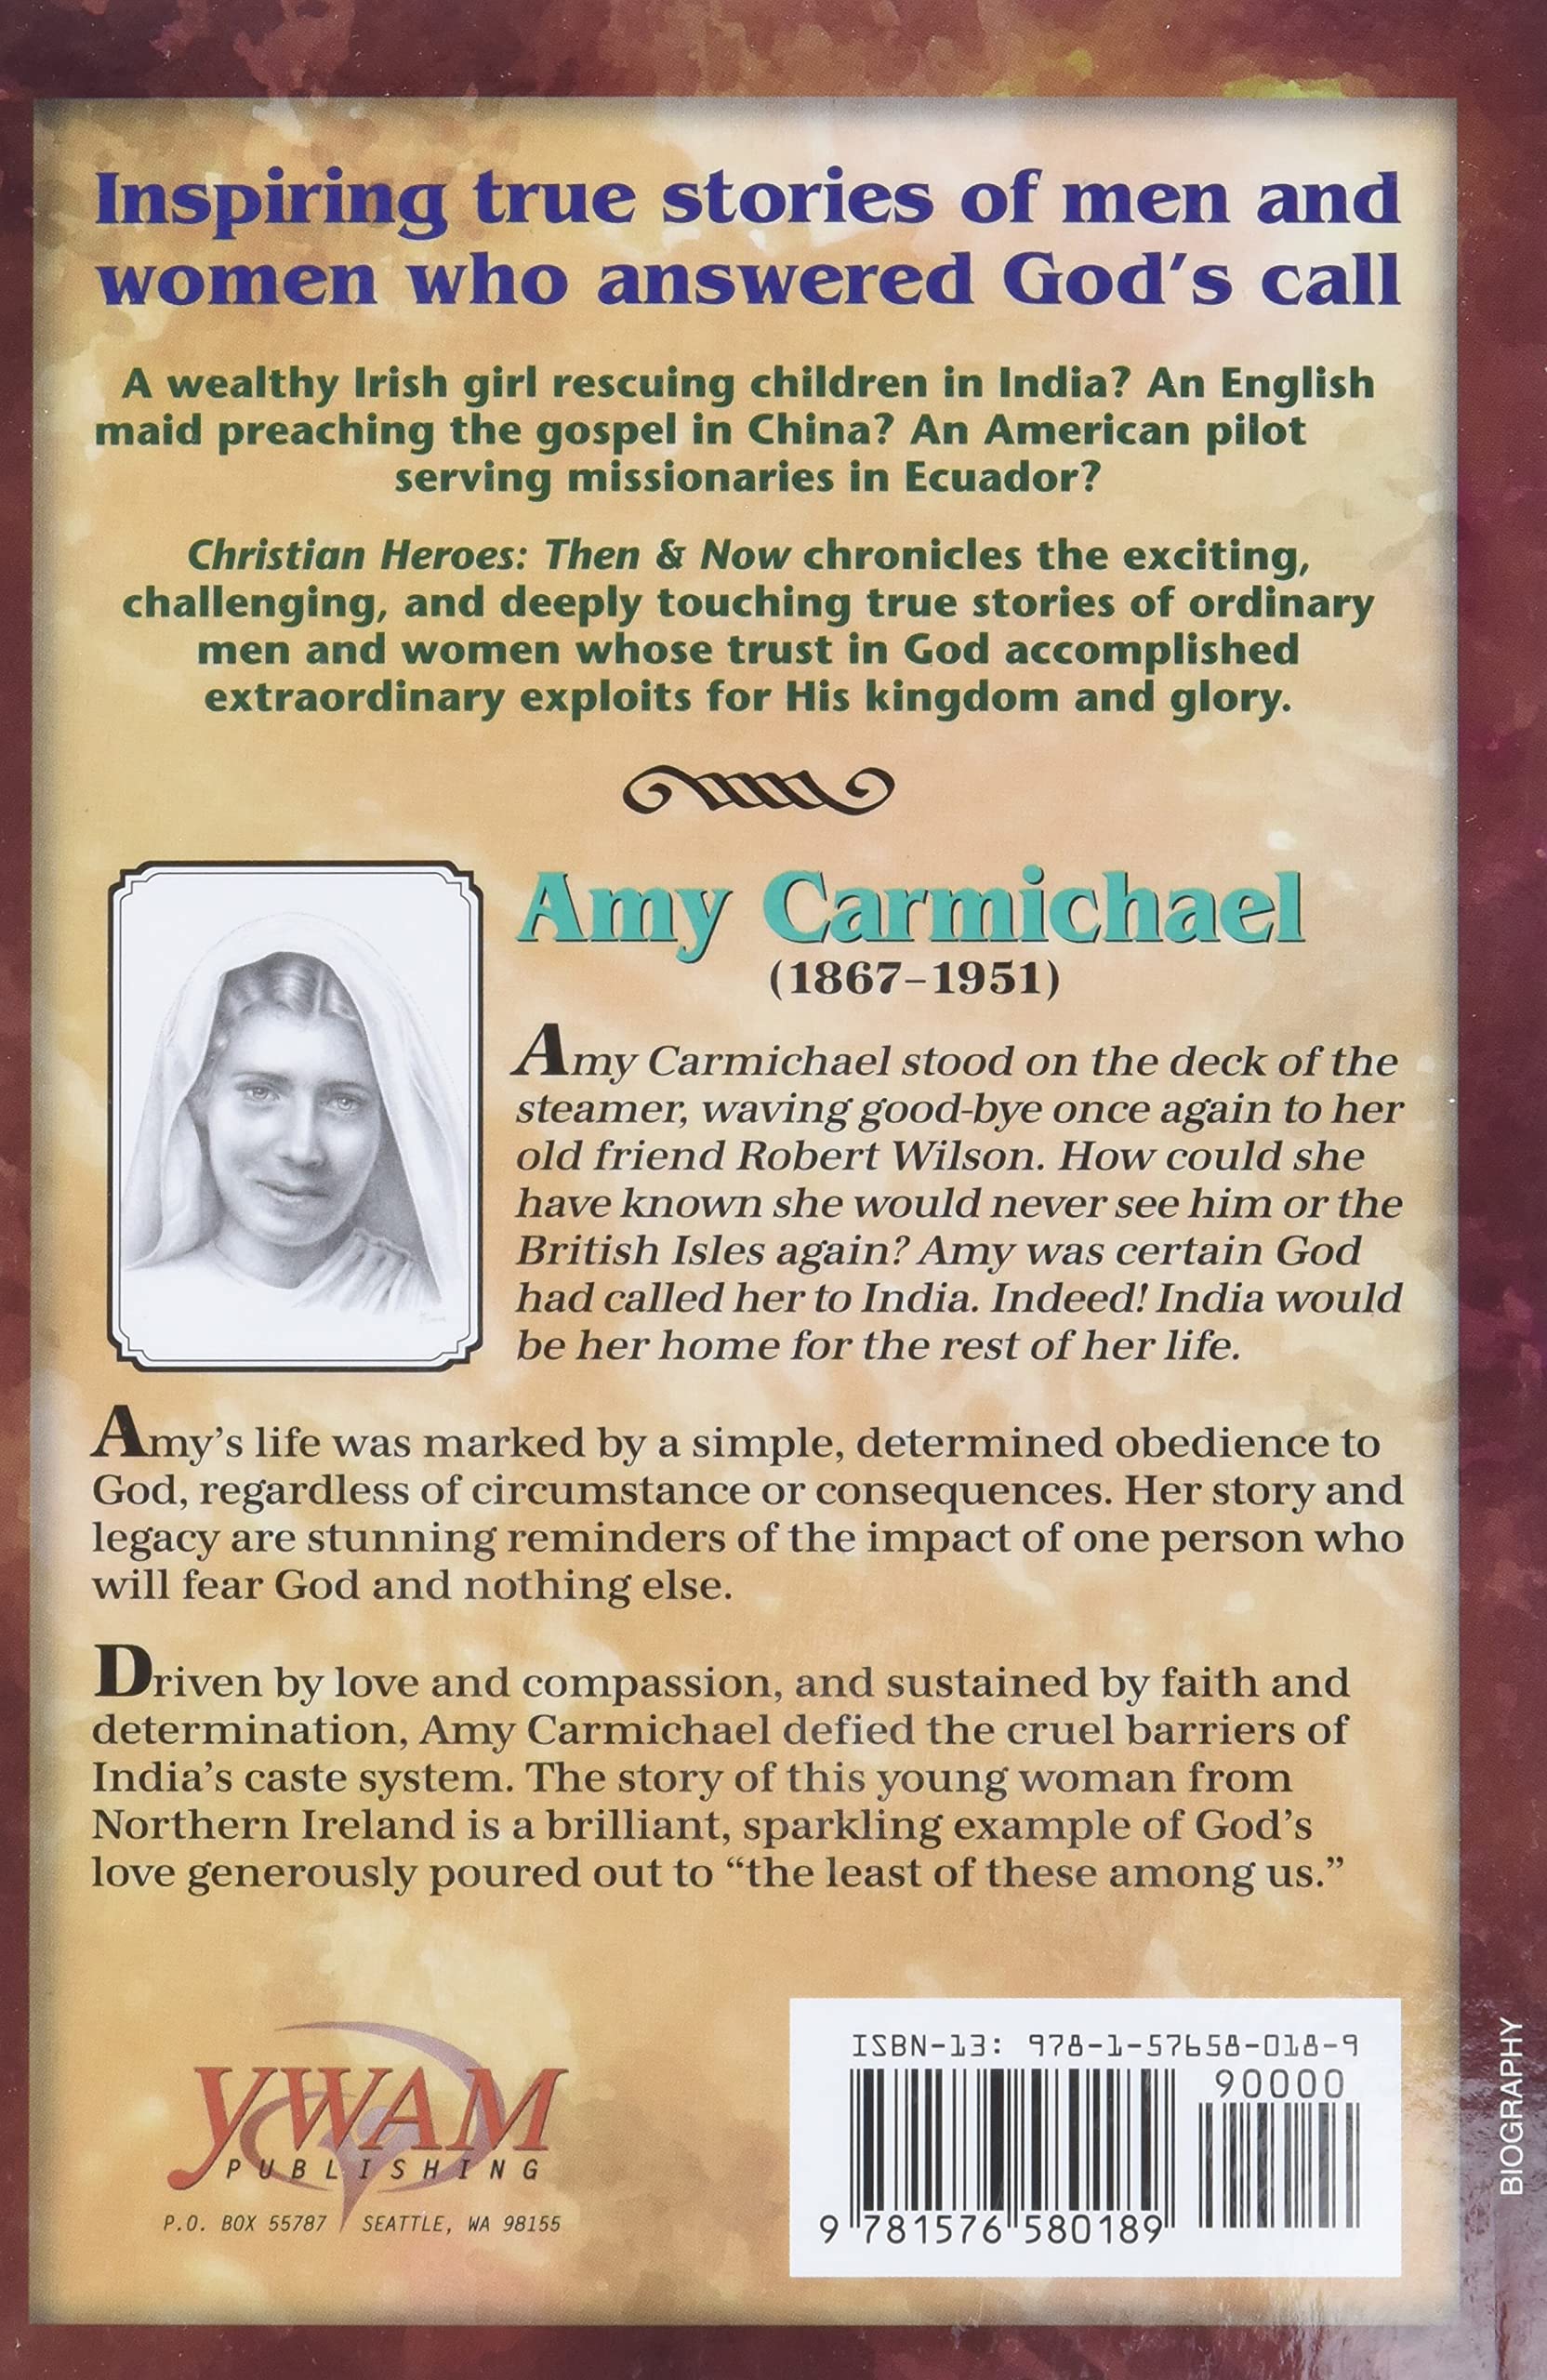 Amy Carmichael: Rescuer of Precious Gems (Christian Heroes: Then & Now)